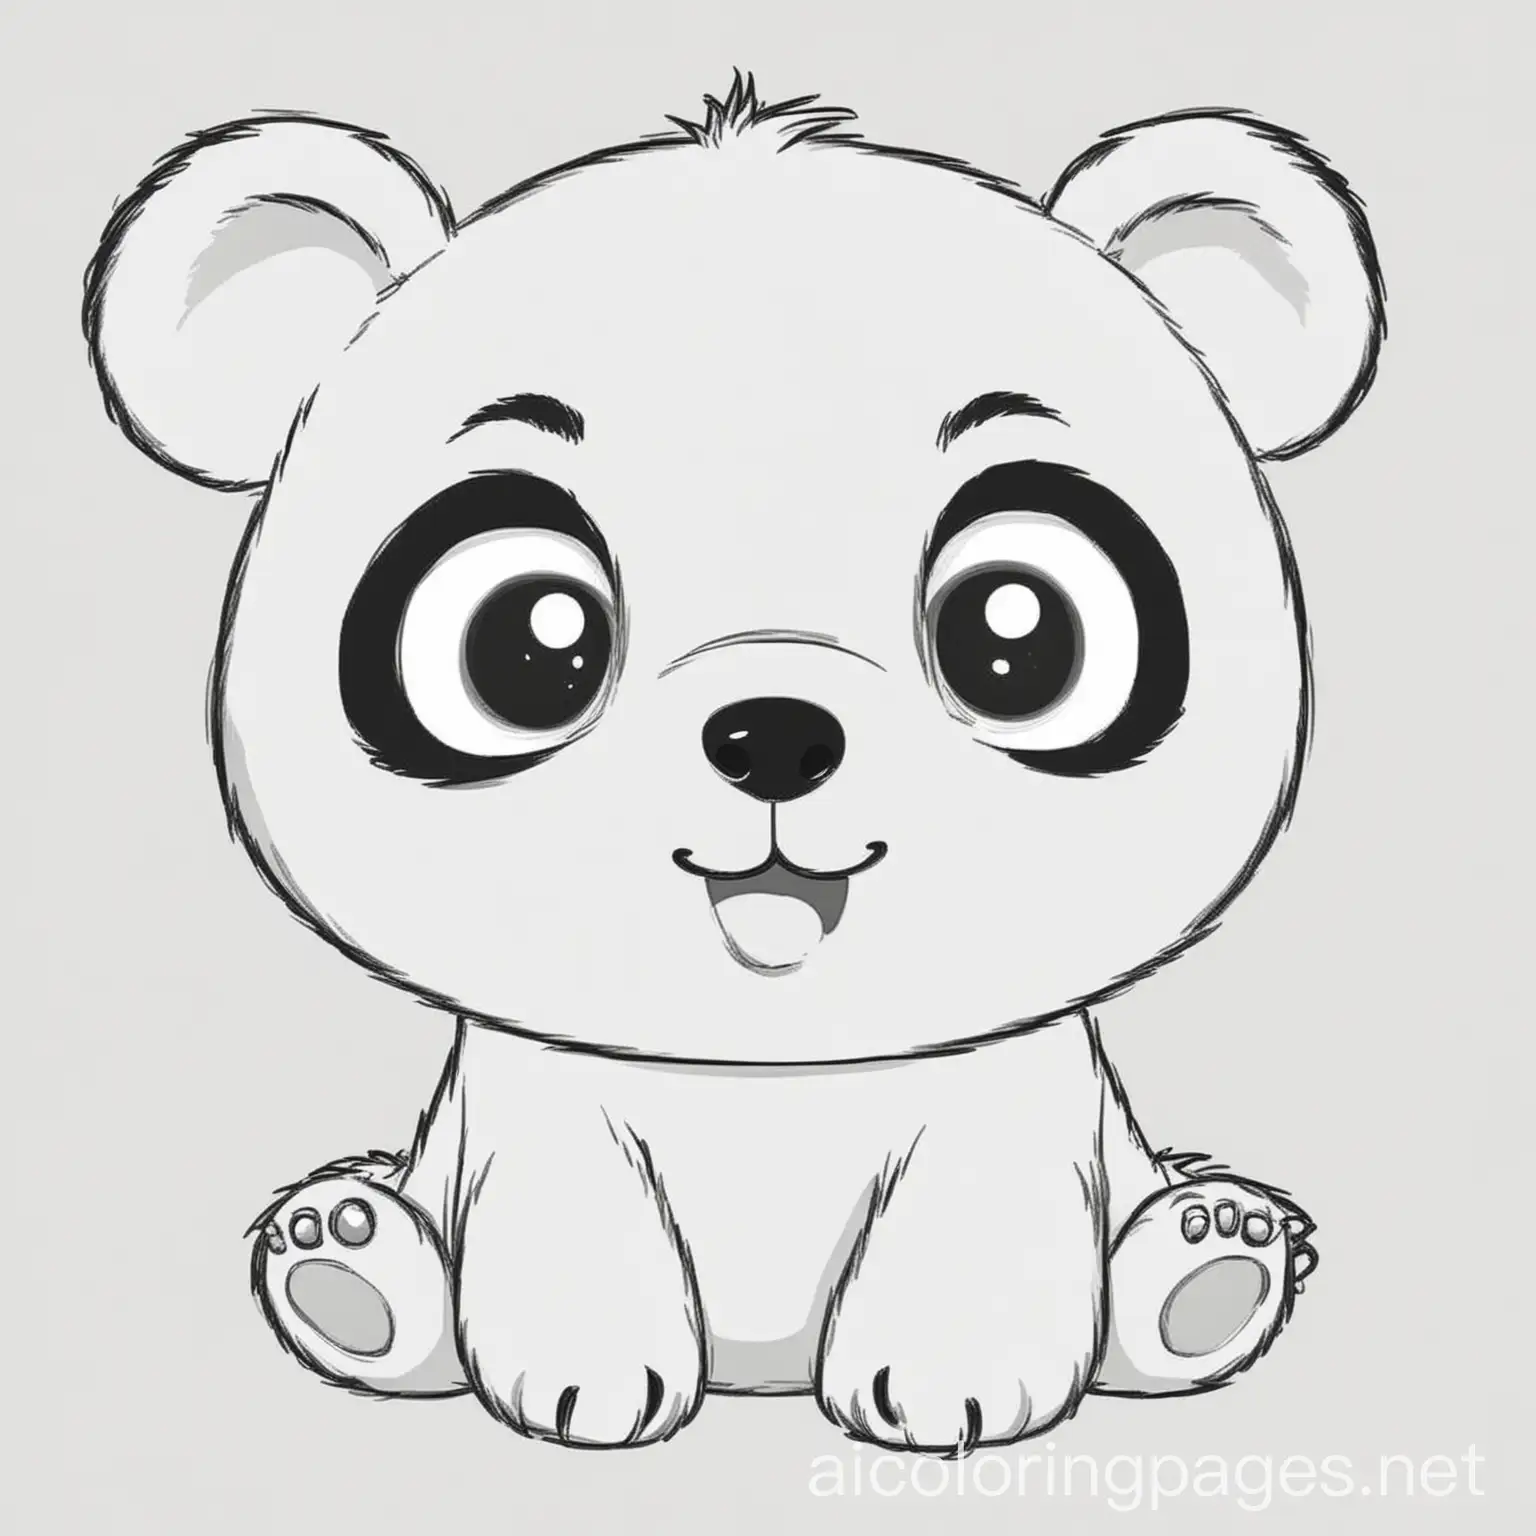 a cute happy panda, big eyes, white background, basic lines, cartoon style, Coloring Page, black and white, line art, white background, Simplicity, Ample White Space. The background of the coloring page is plain white to make it easy for young children to color within the lines. The outlines of all the subjects are easy to distinguish, making it simple for kids to color without too much difficulty